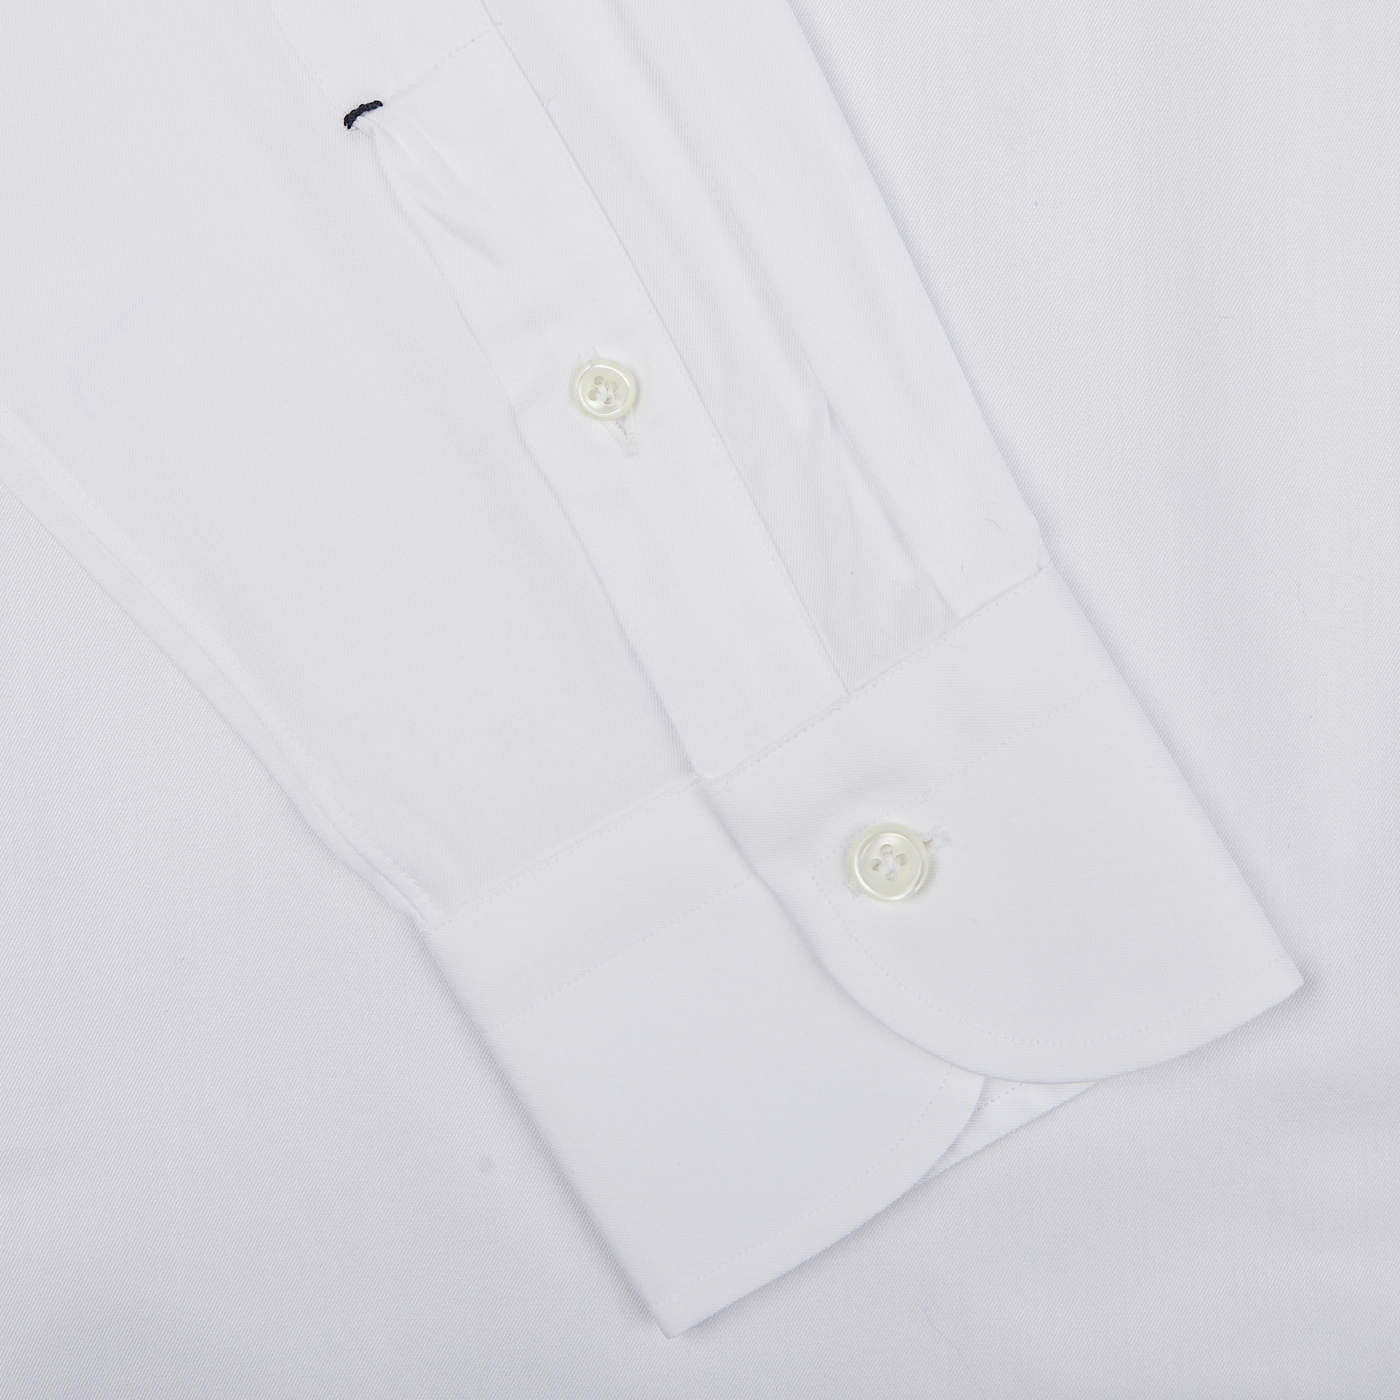 Close-up of a Mazzarelli White Cotton Twill Cutaway Slim Shirt with a placket front, showing two visible buttons and button-down cuffs.